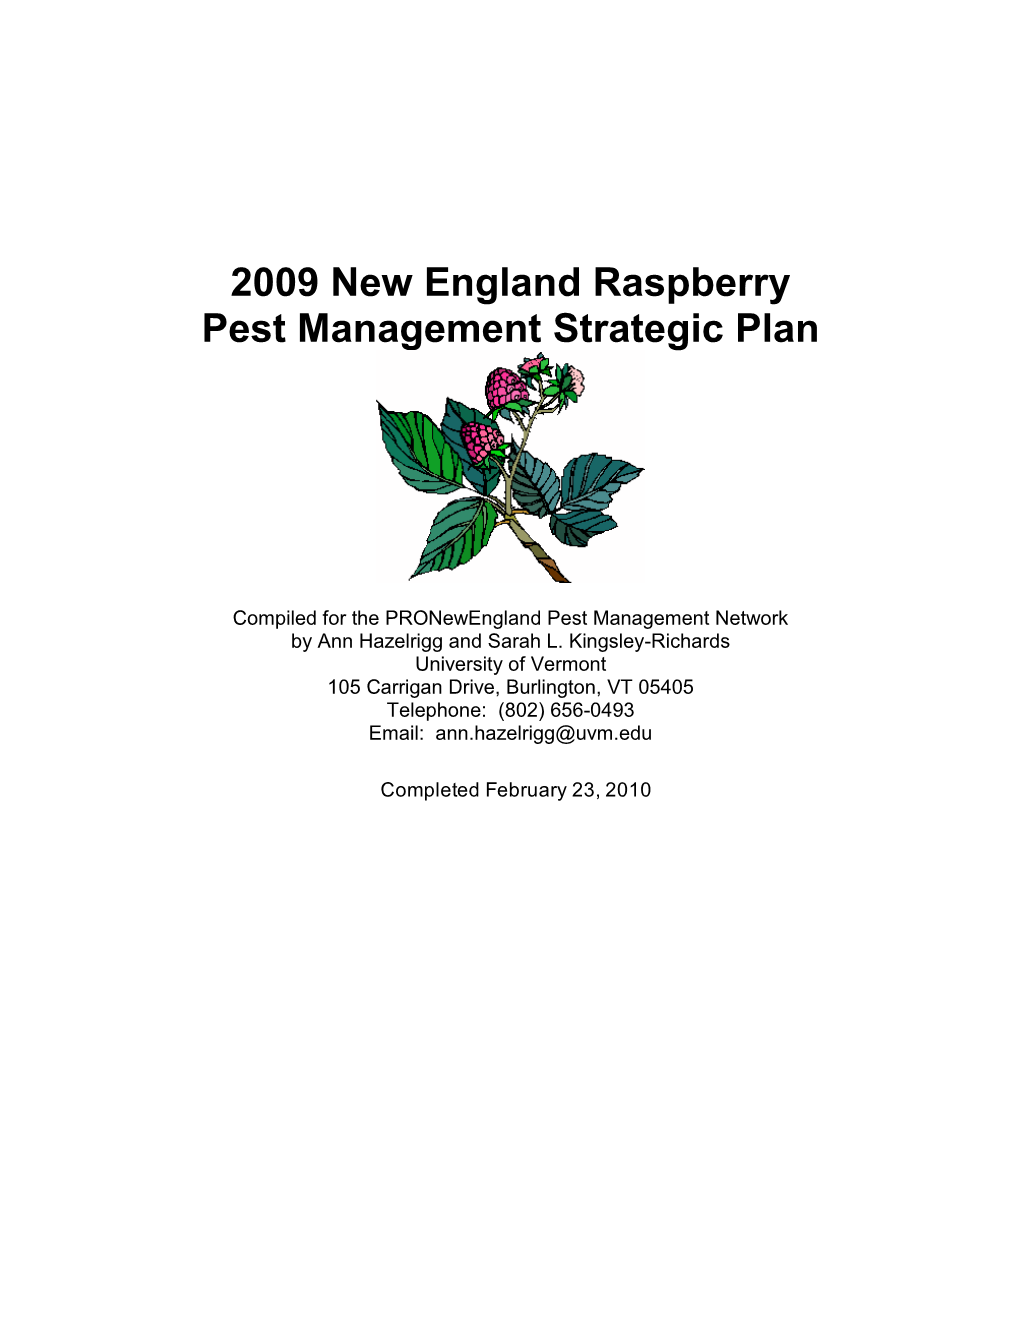 Attachment 11: Pest Management Strategic Plan Protocol and Template